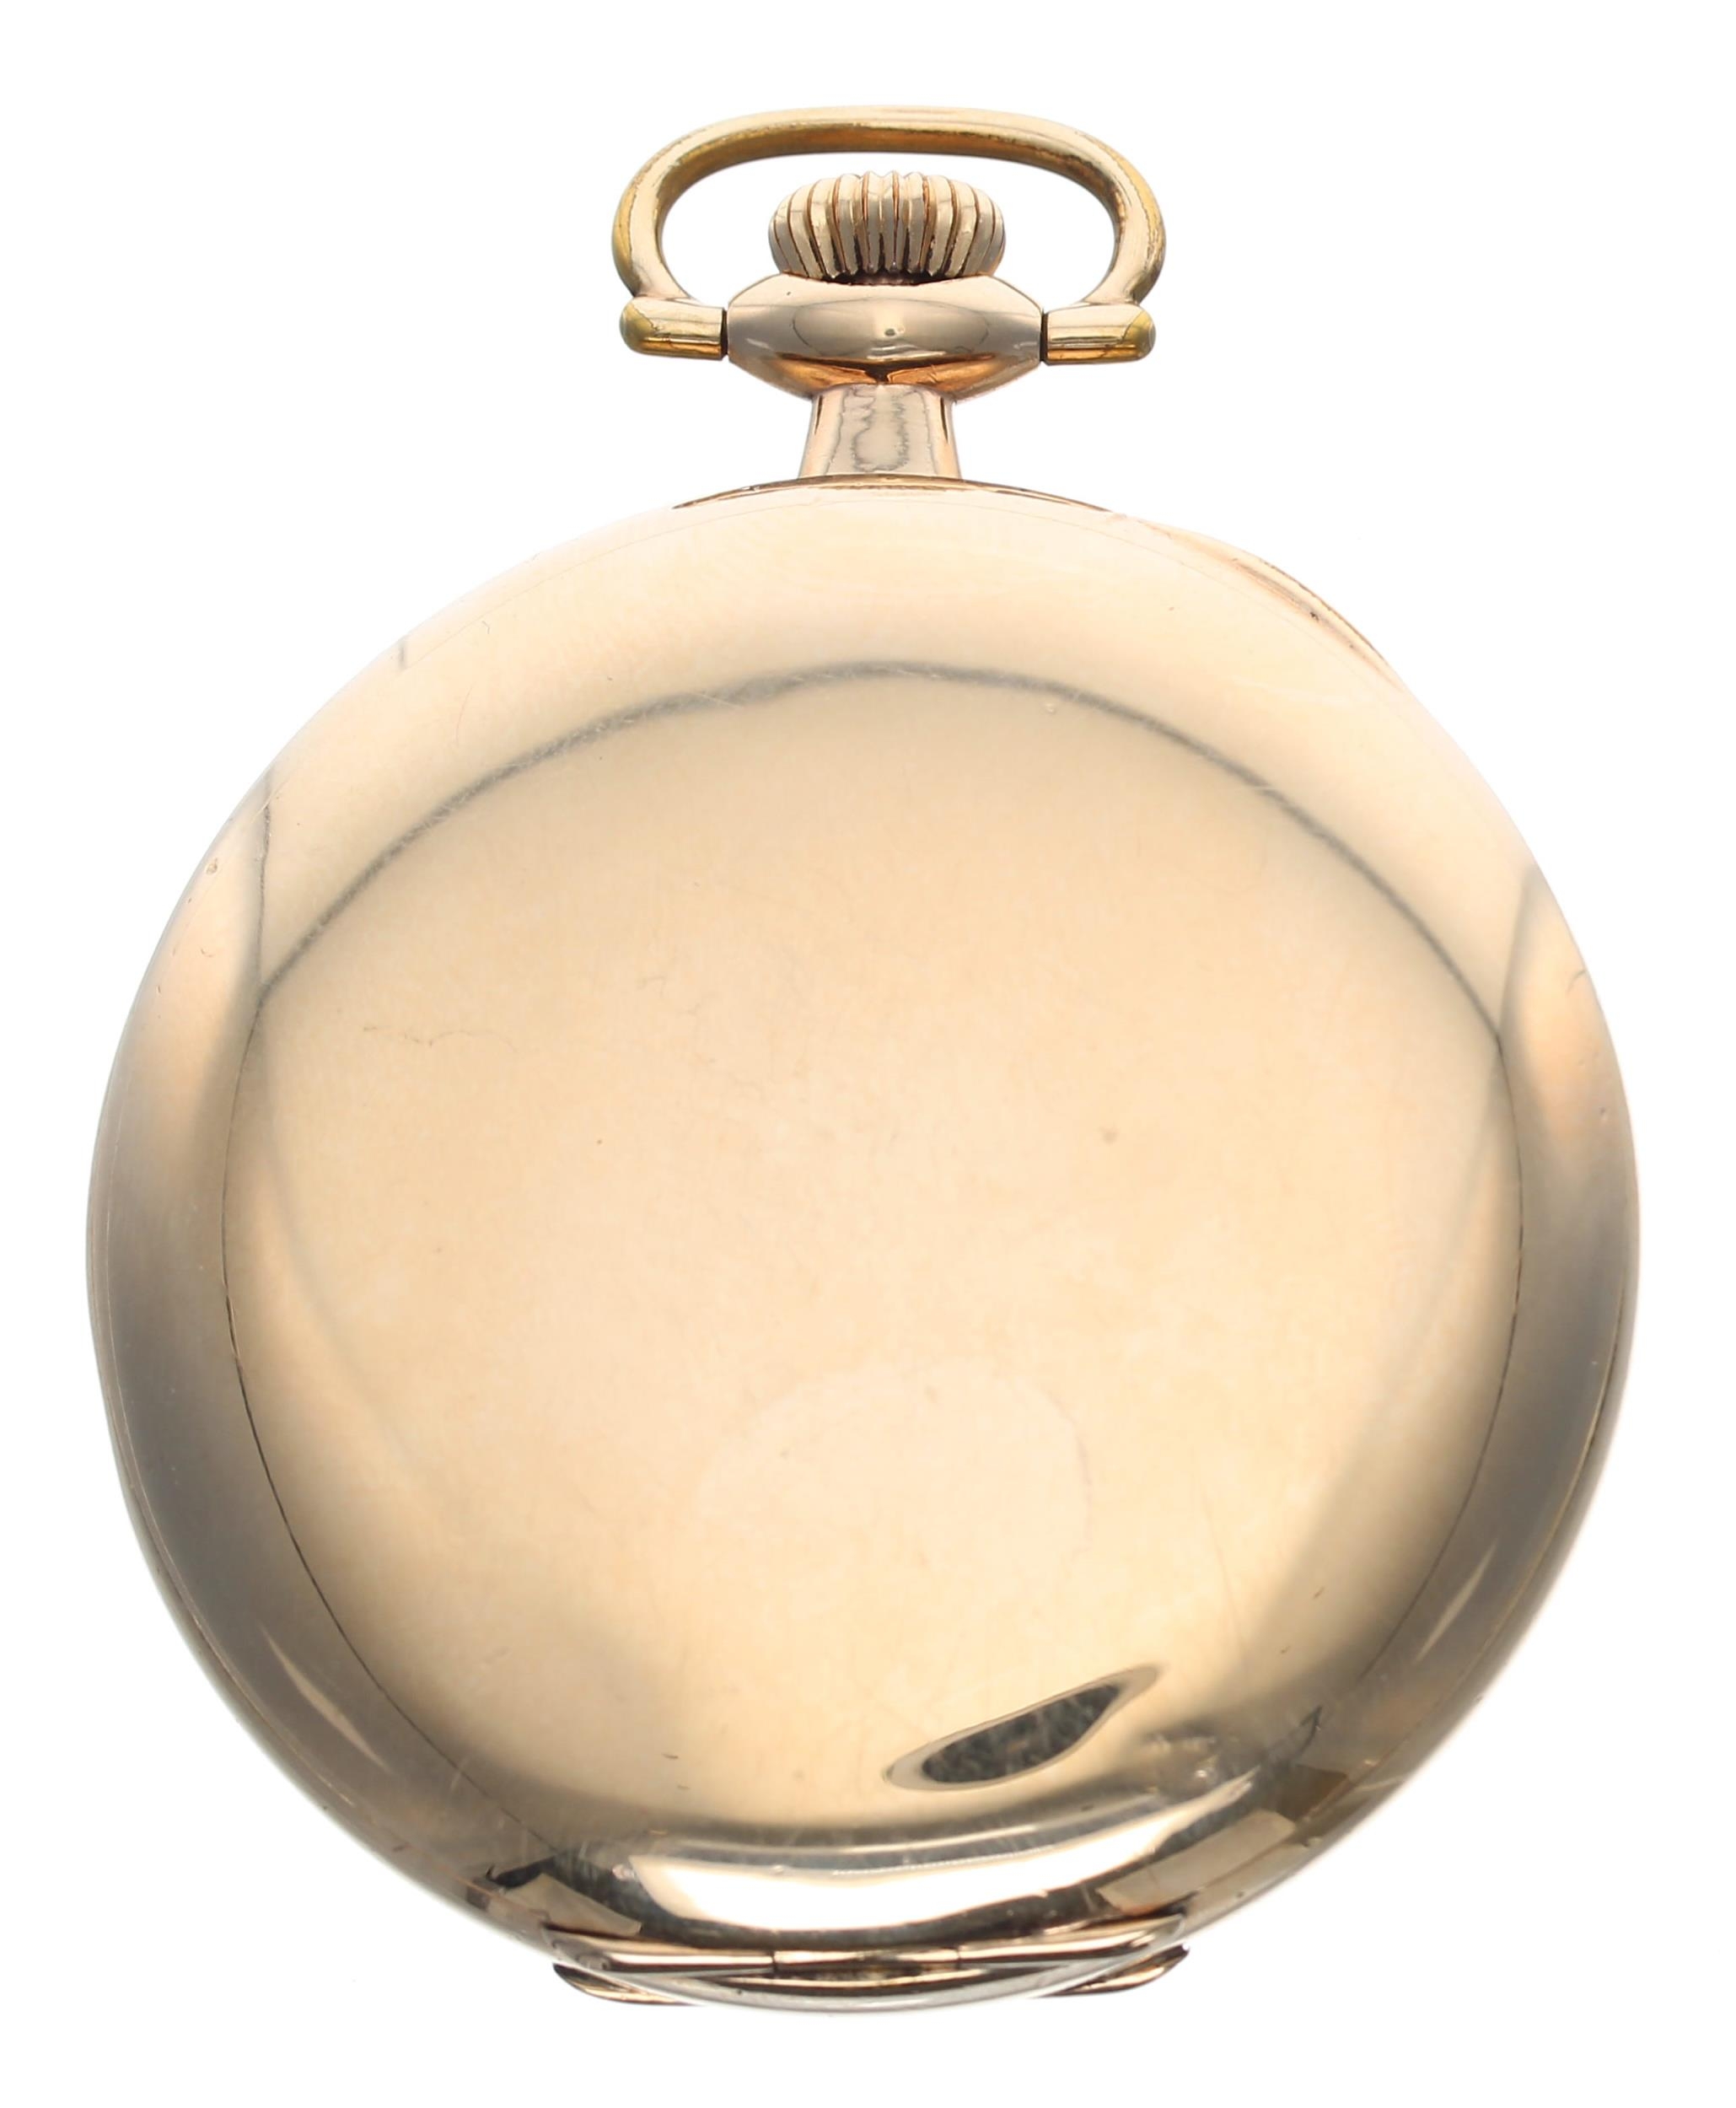 Burlington Watch Co. gold plated lever hunter pocket watch, circa 1920, signed 21 jewel adjusted - Image 5 of 5